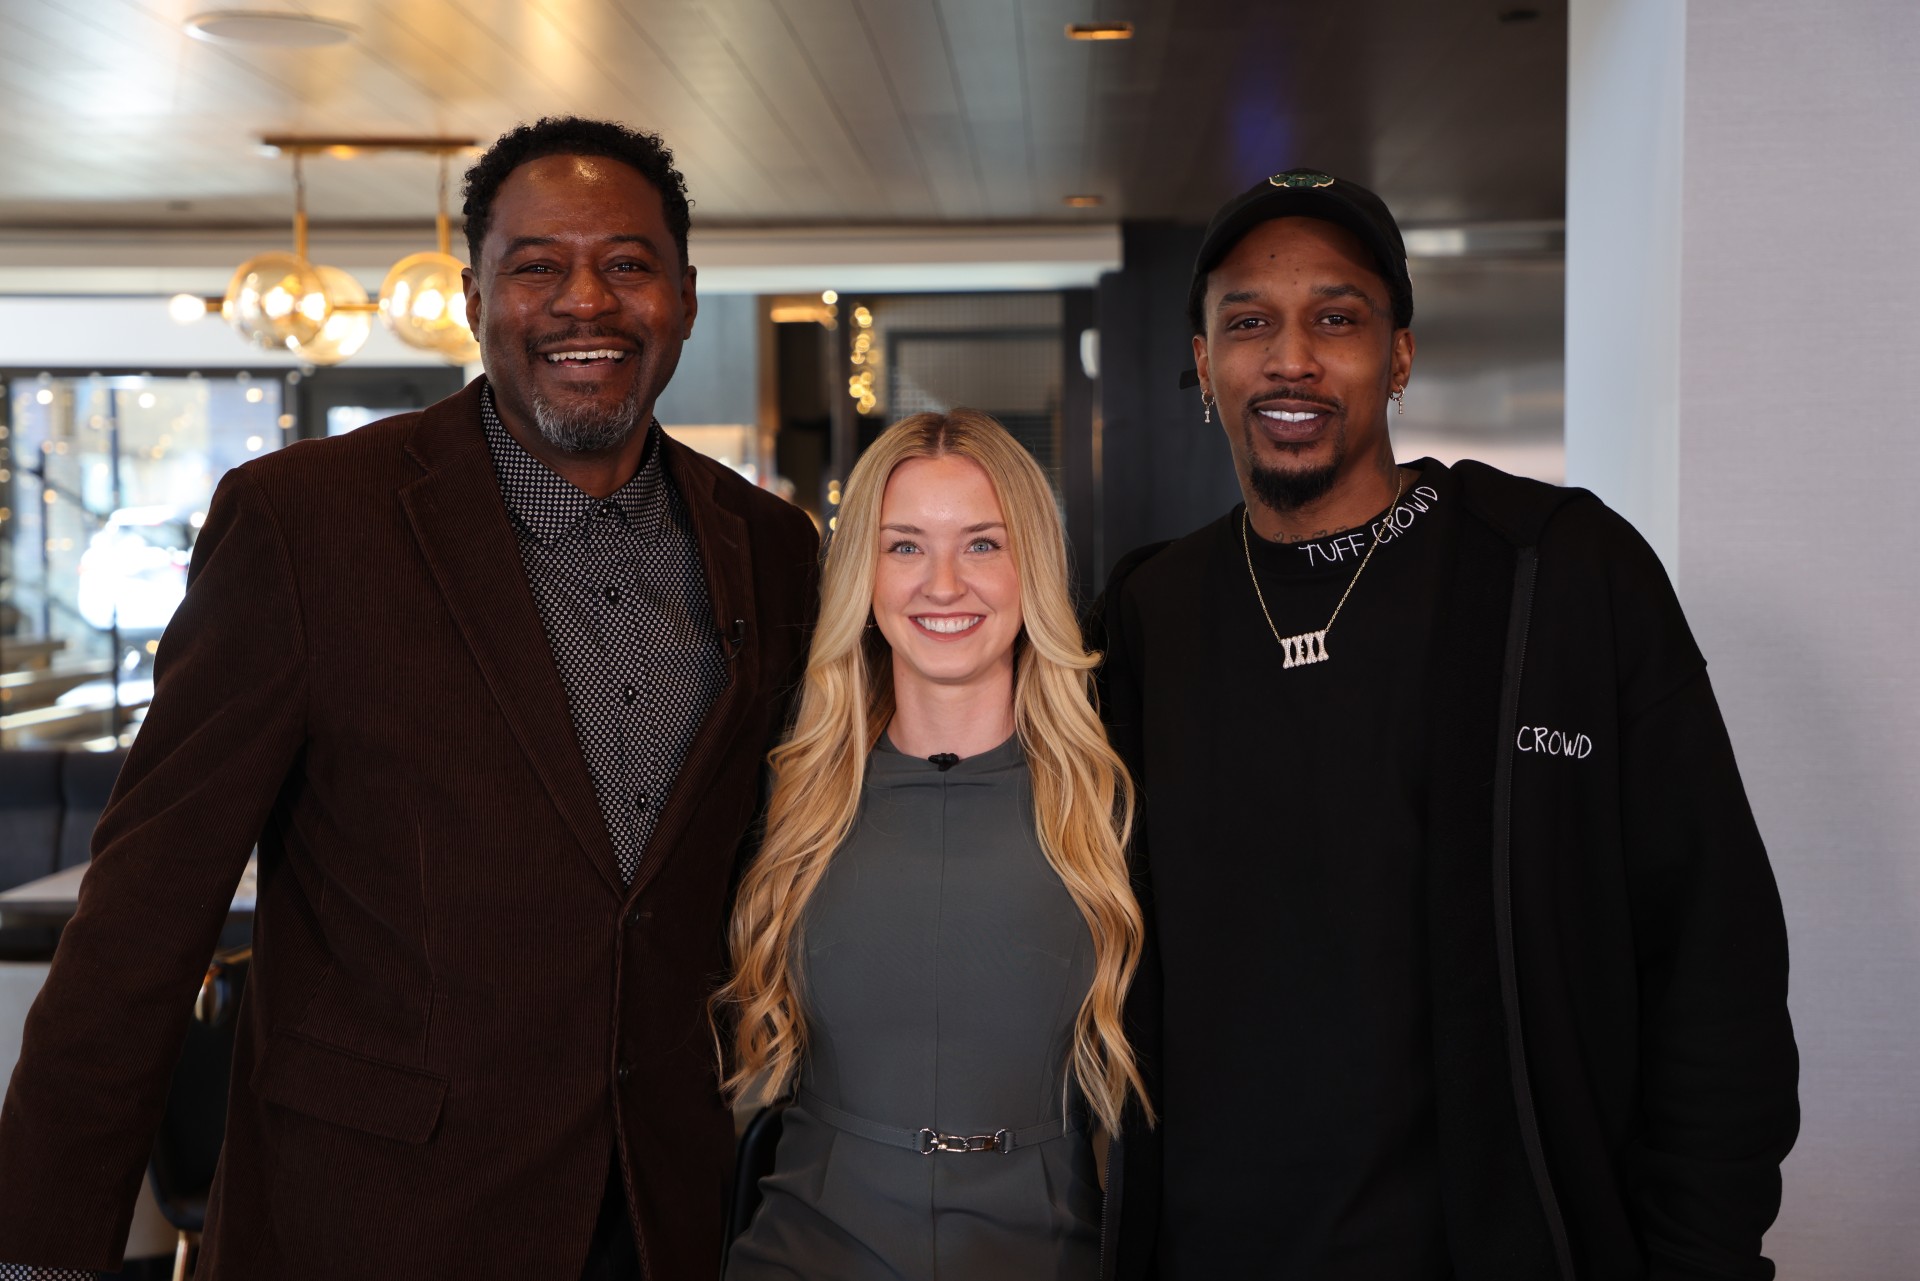 Anthony and Nicole with Bucks legend Brandon Jennings by 